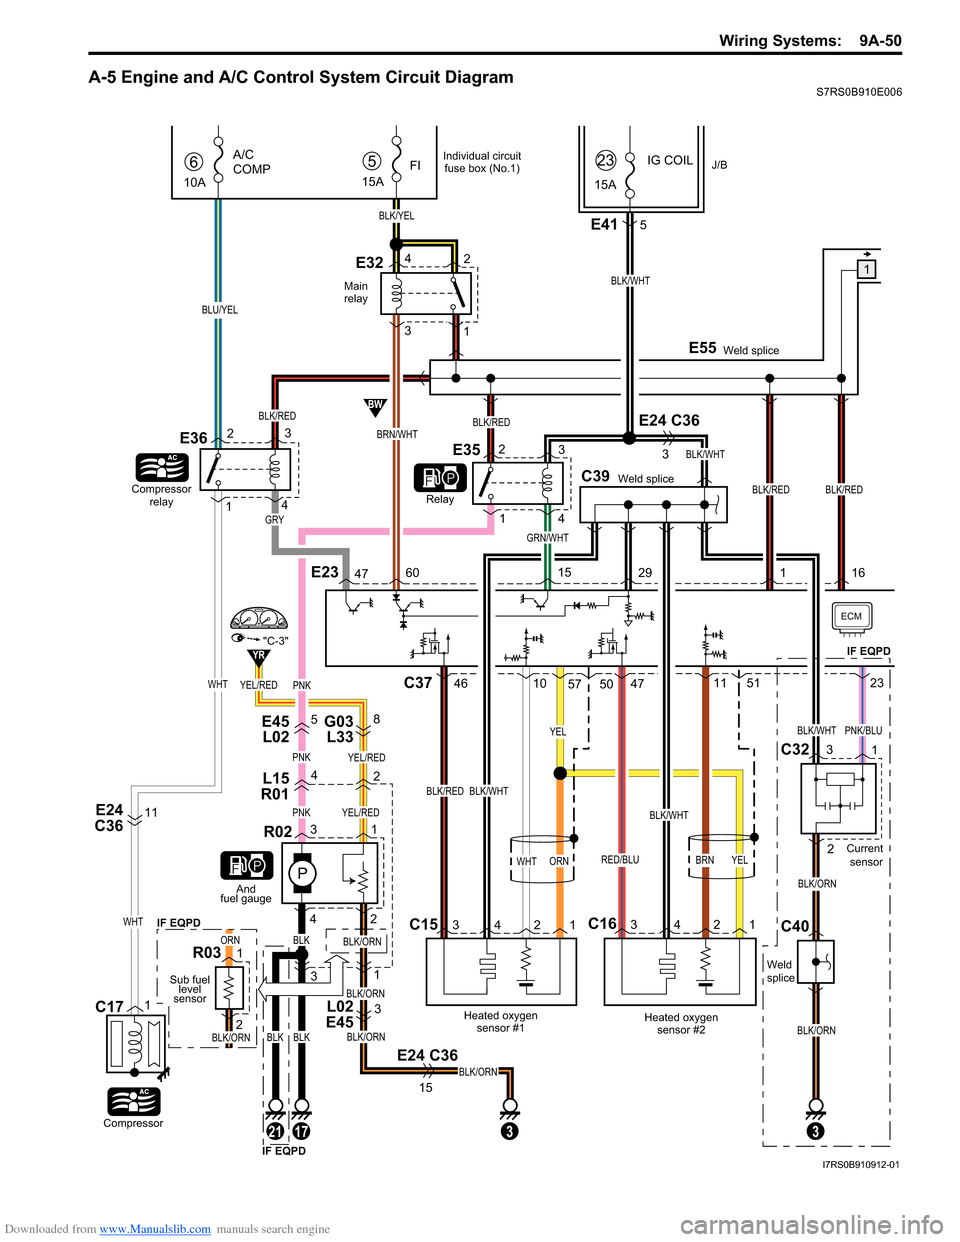 SUZUKI SWIFT 2008 2.G Service Workshop Manual Downloaded from www.Manualslib.com manuals search engine Wiring Systems:  9A-50
A-5 Engine and A/C Control System Circuit DiagramS7RS0B910E006
YEL/RED
E45L02 G03 
L33
L02 
E4558
L15
R0142
PNKYEL/RED
P